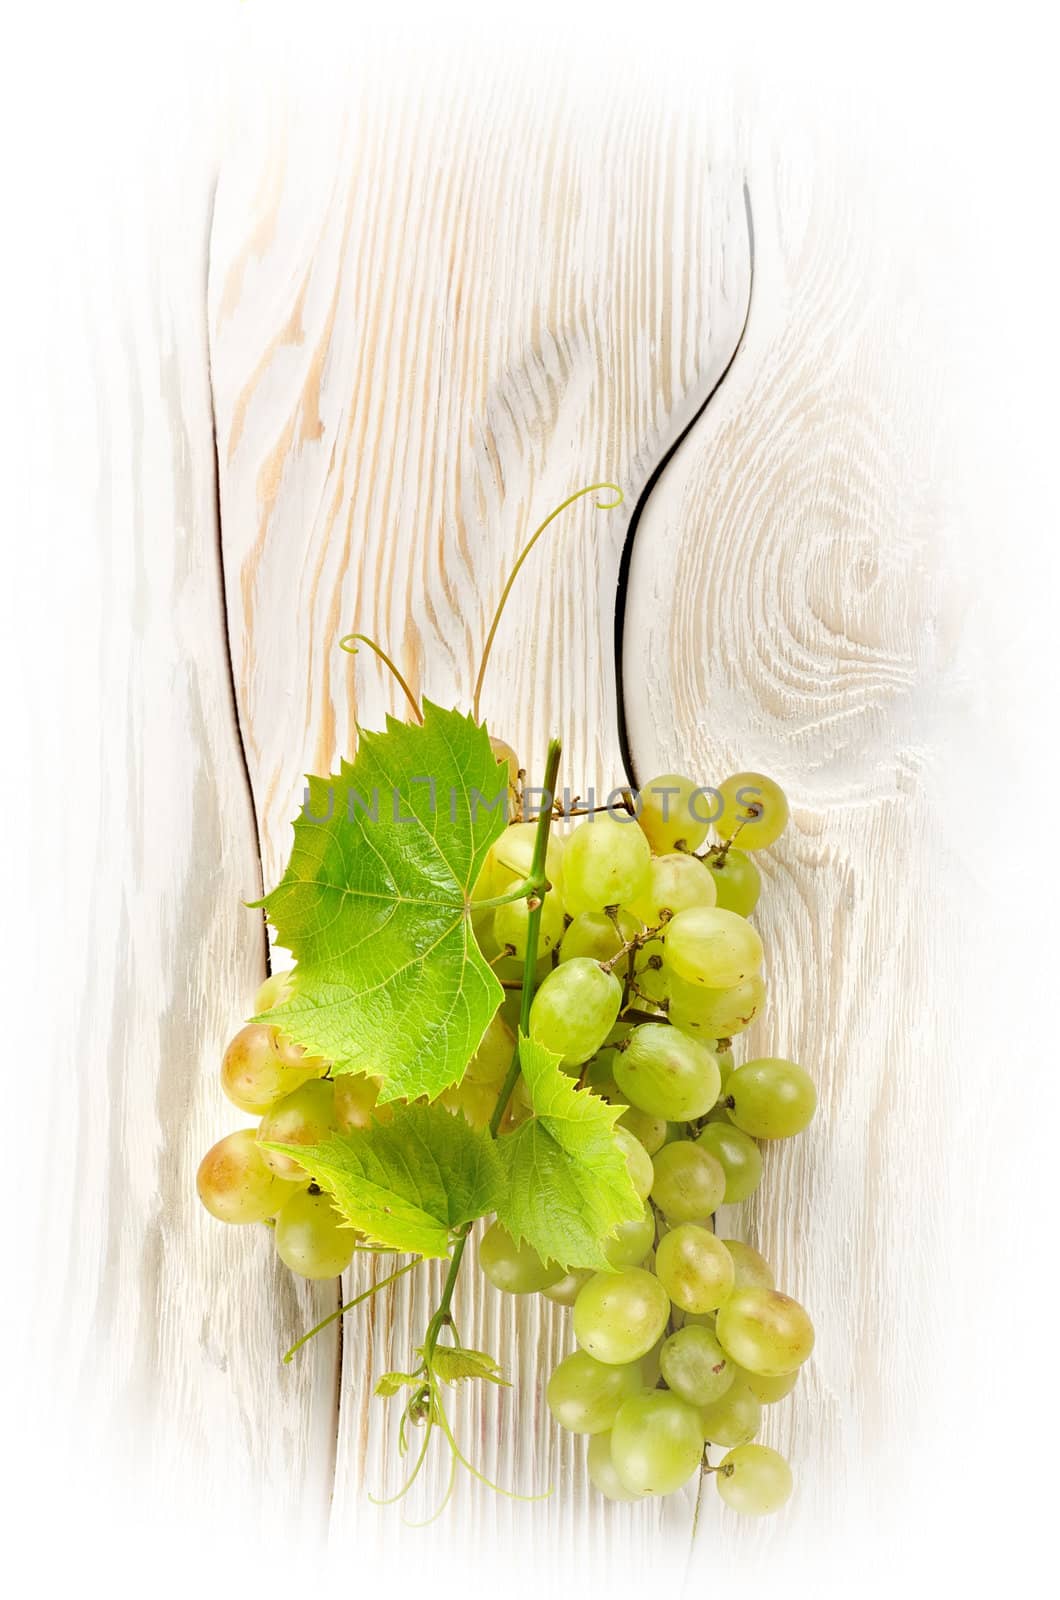 Green grapes on the table by Givaga